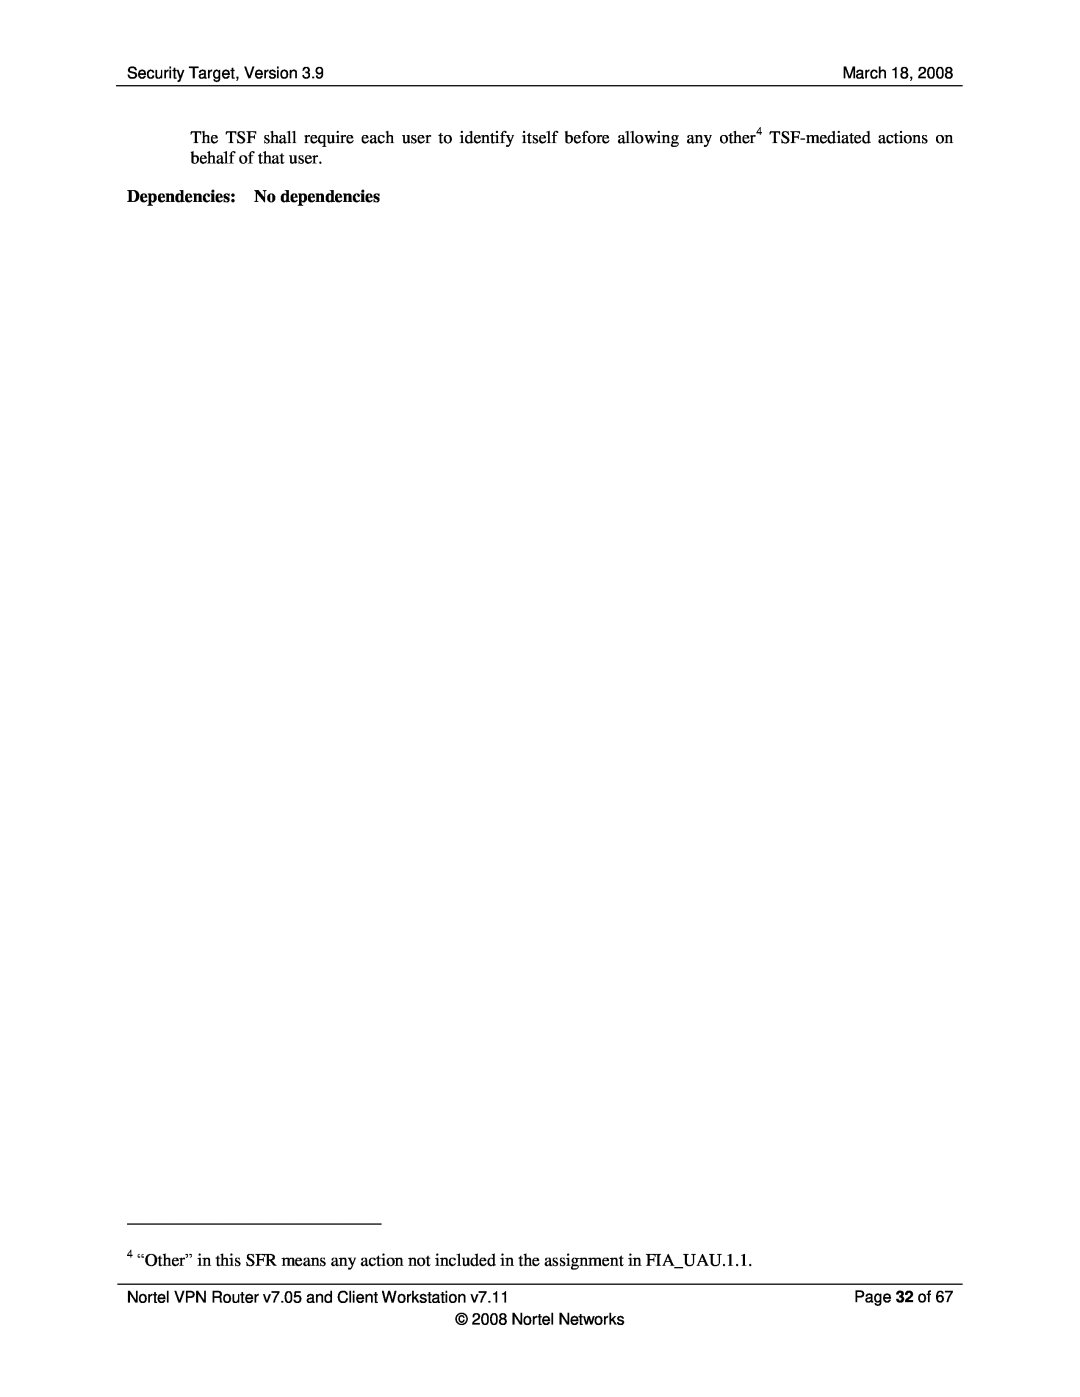 Nortel Networks 7.05, 7.11 manual Page 32 of 